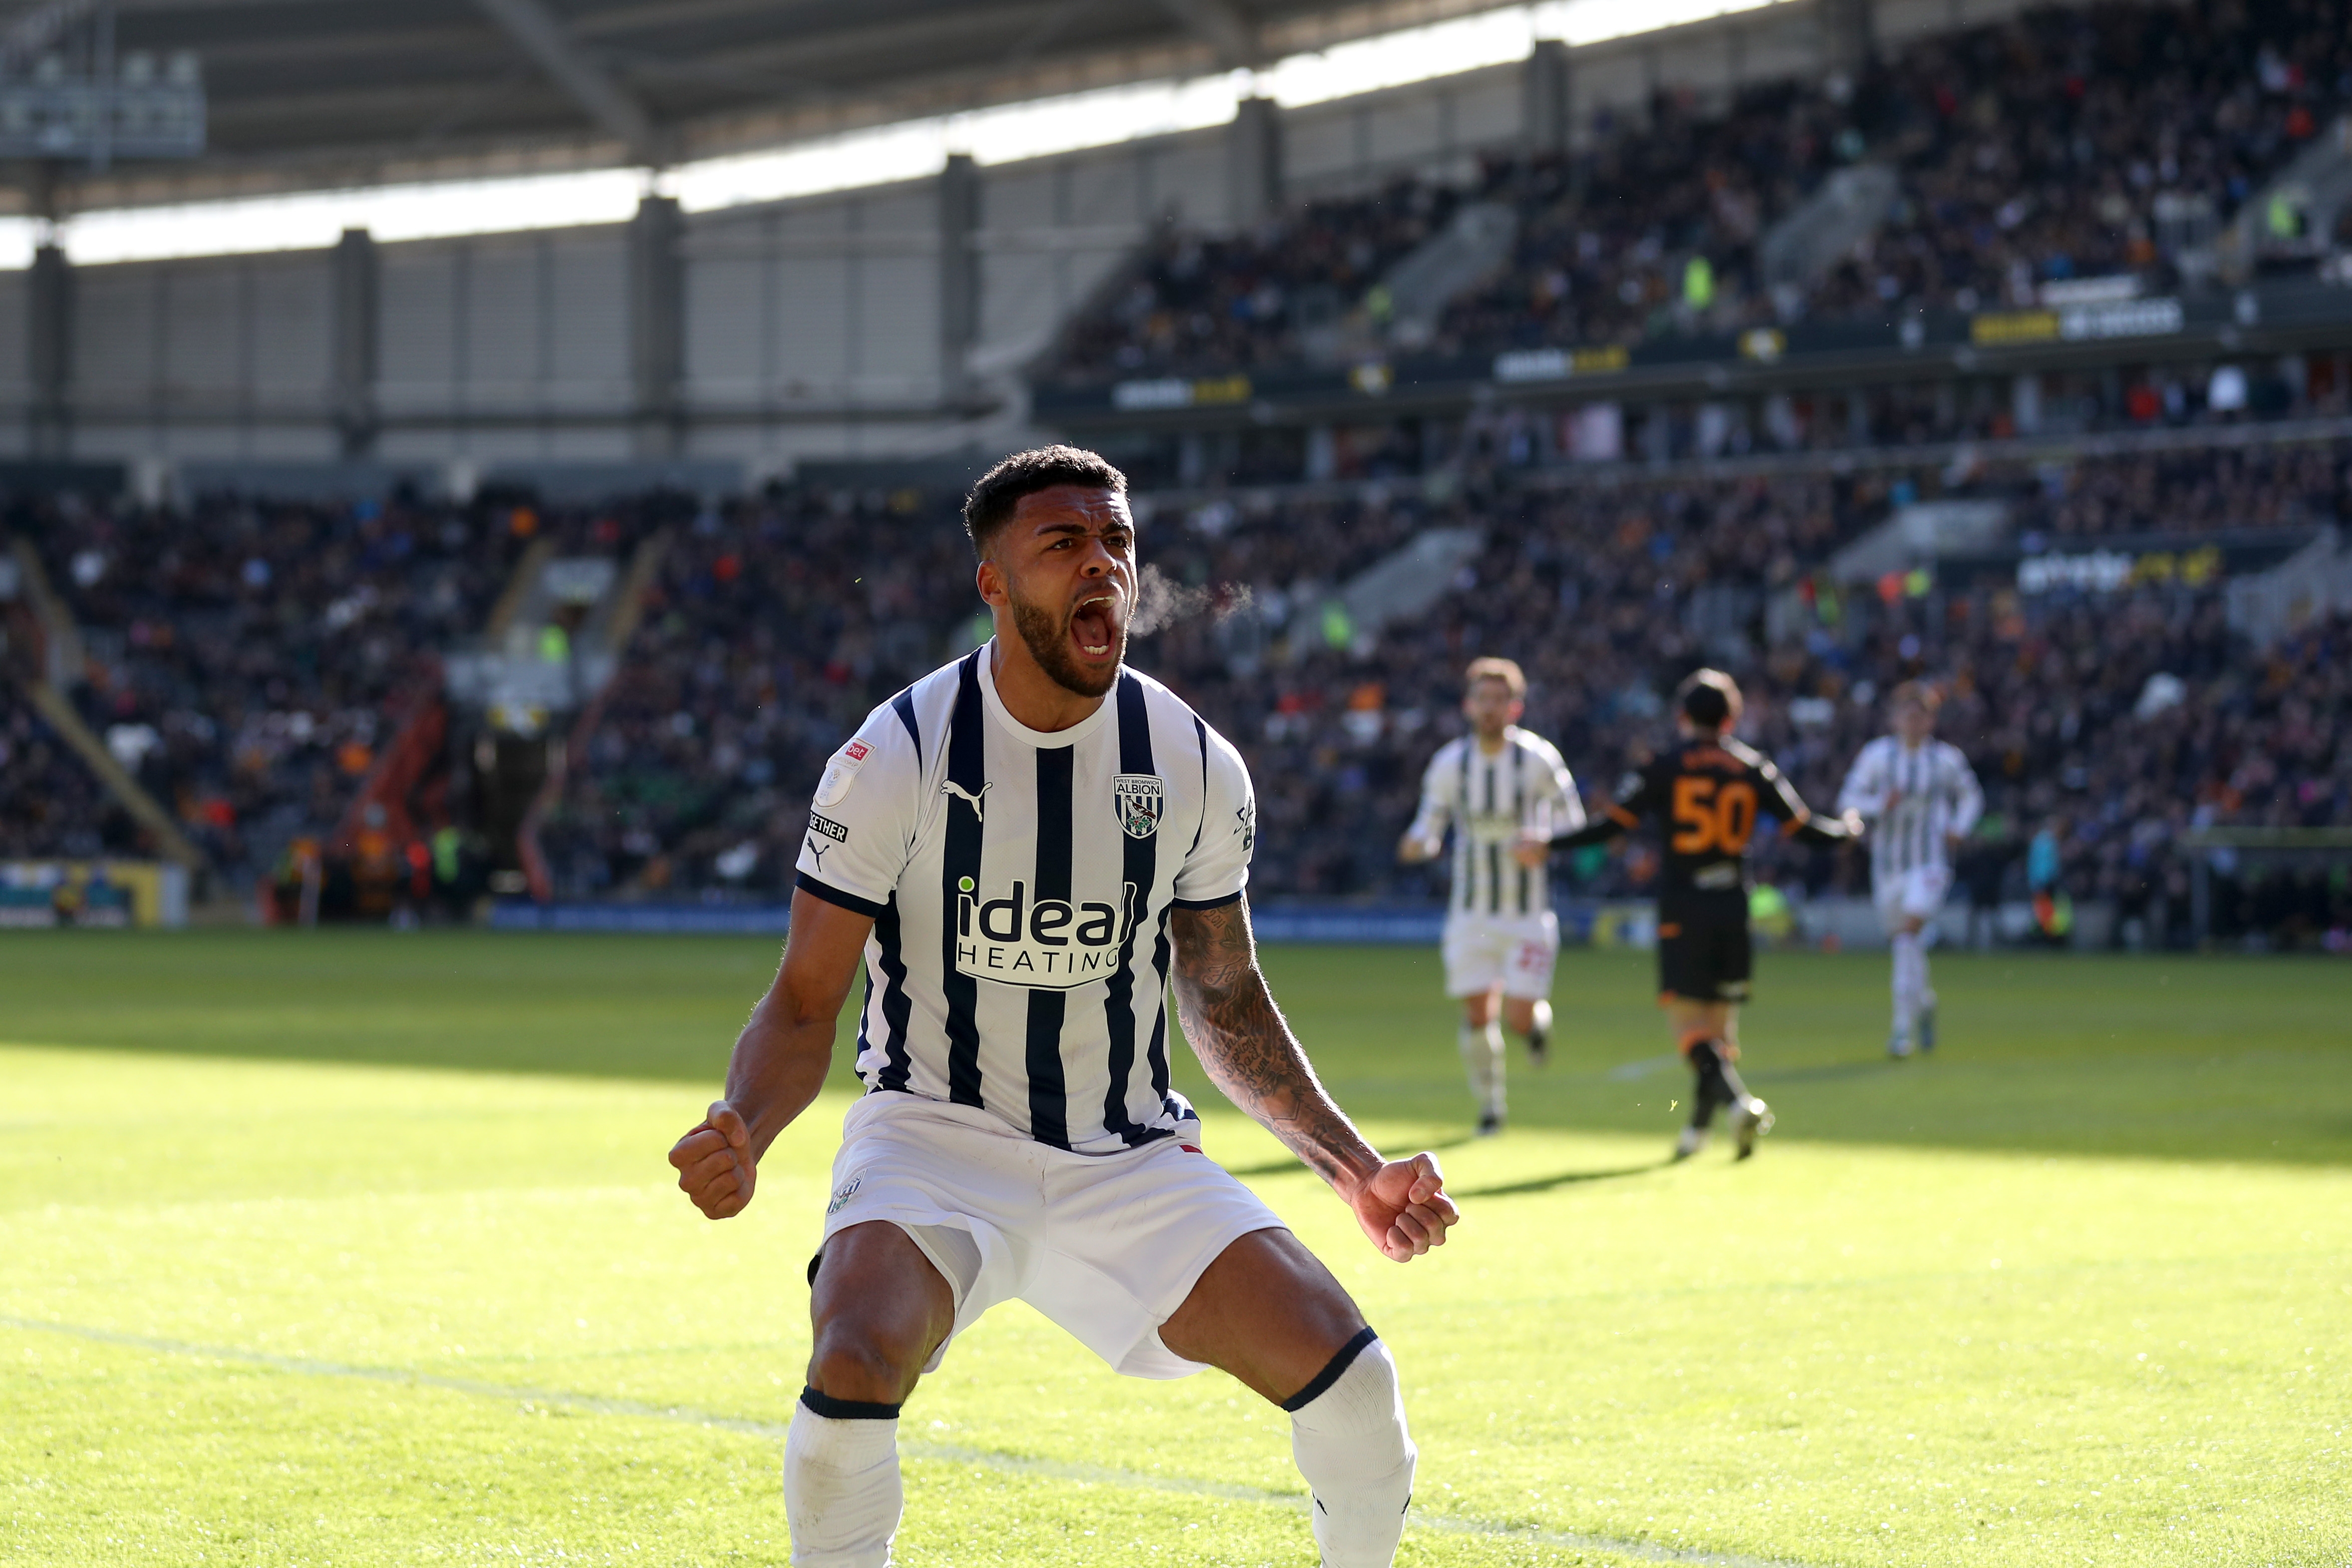 Darnell Furlong celebrates his goal against Hull in front of the Albion fans